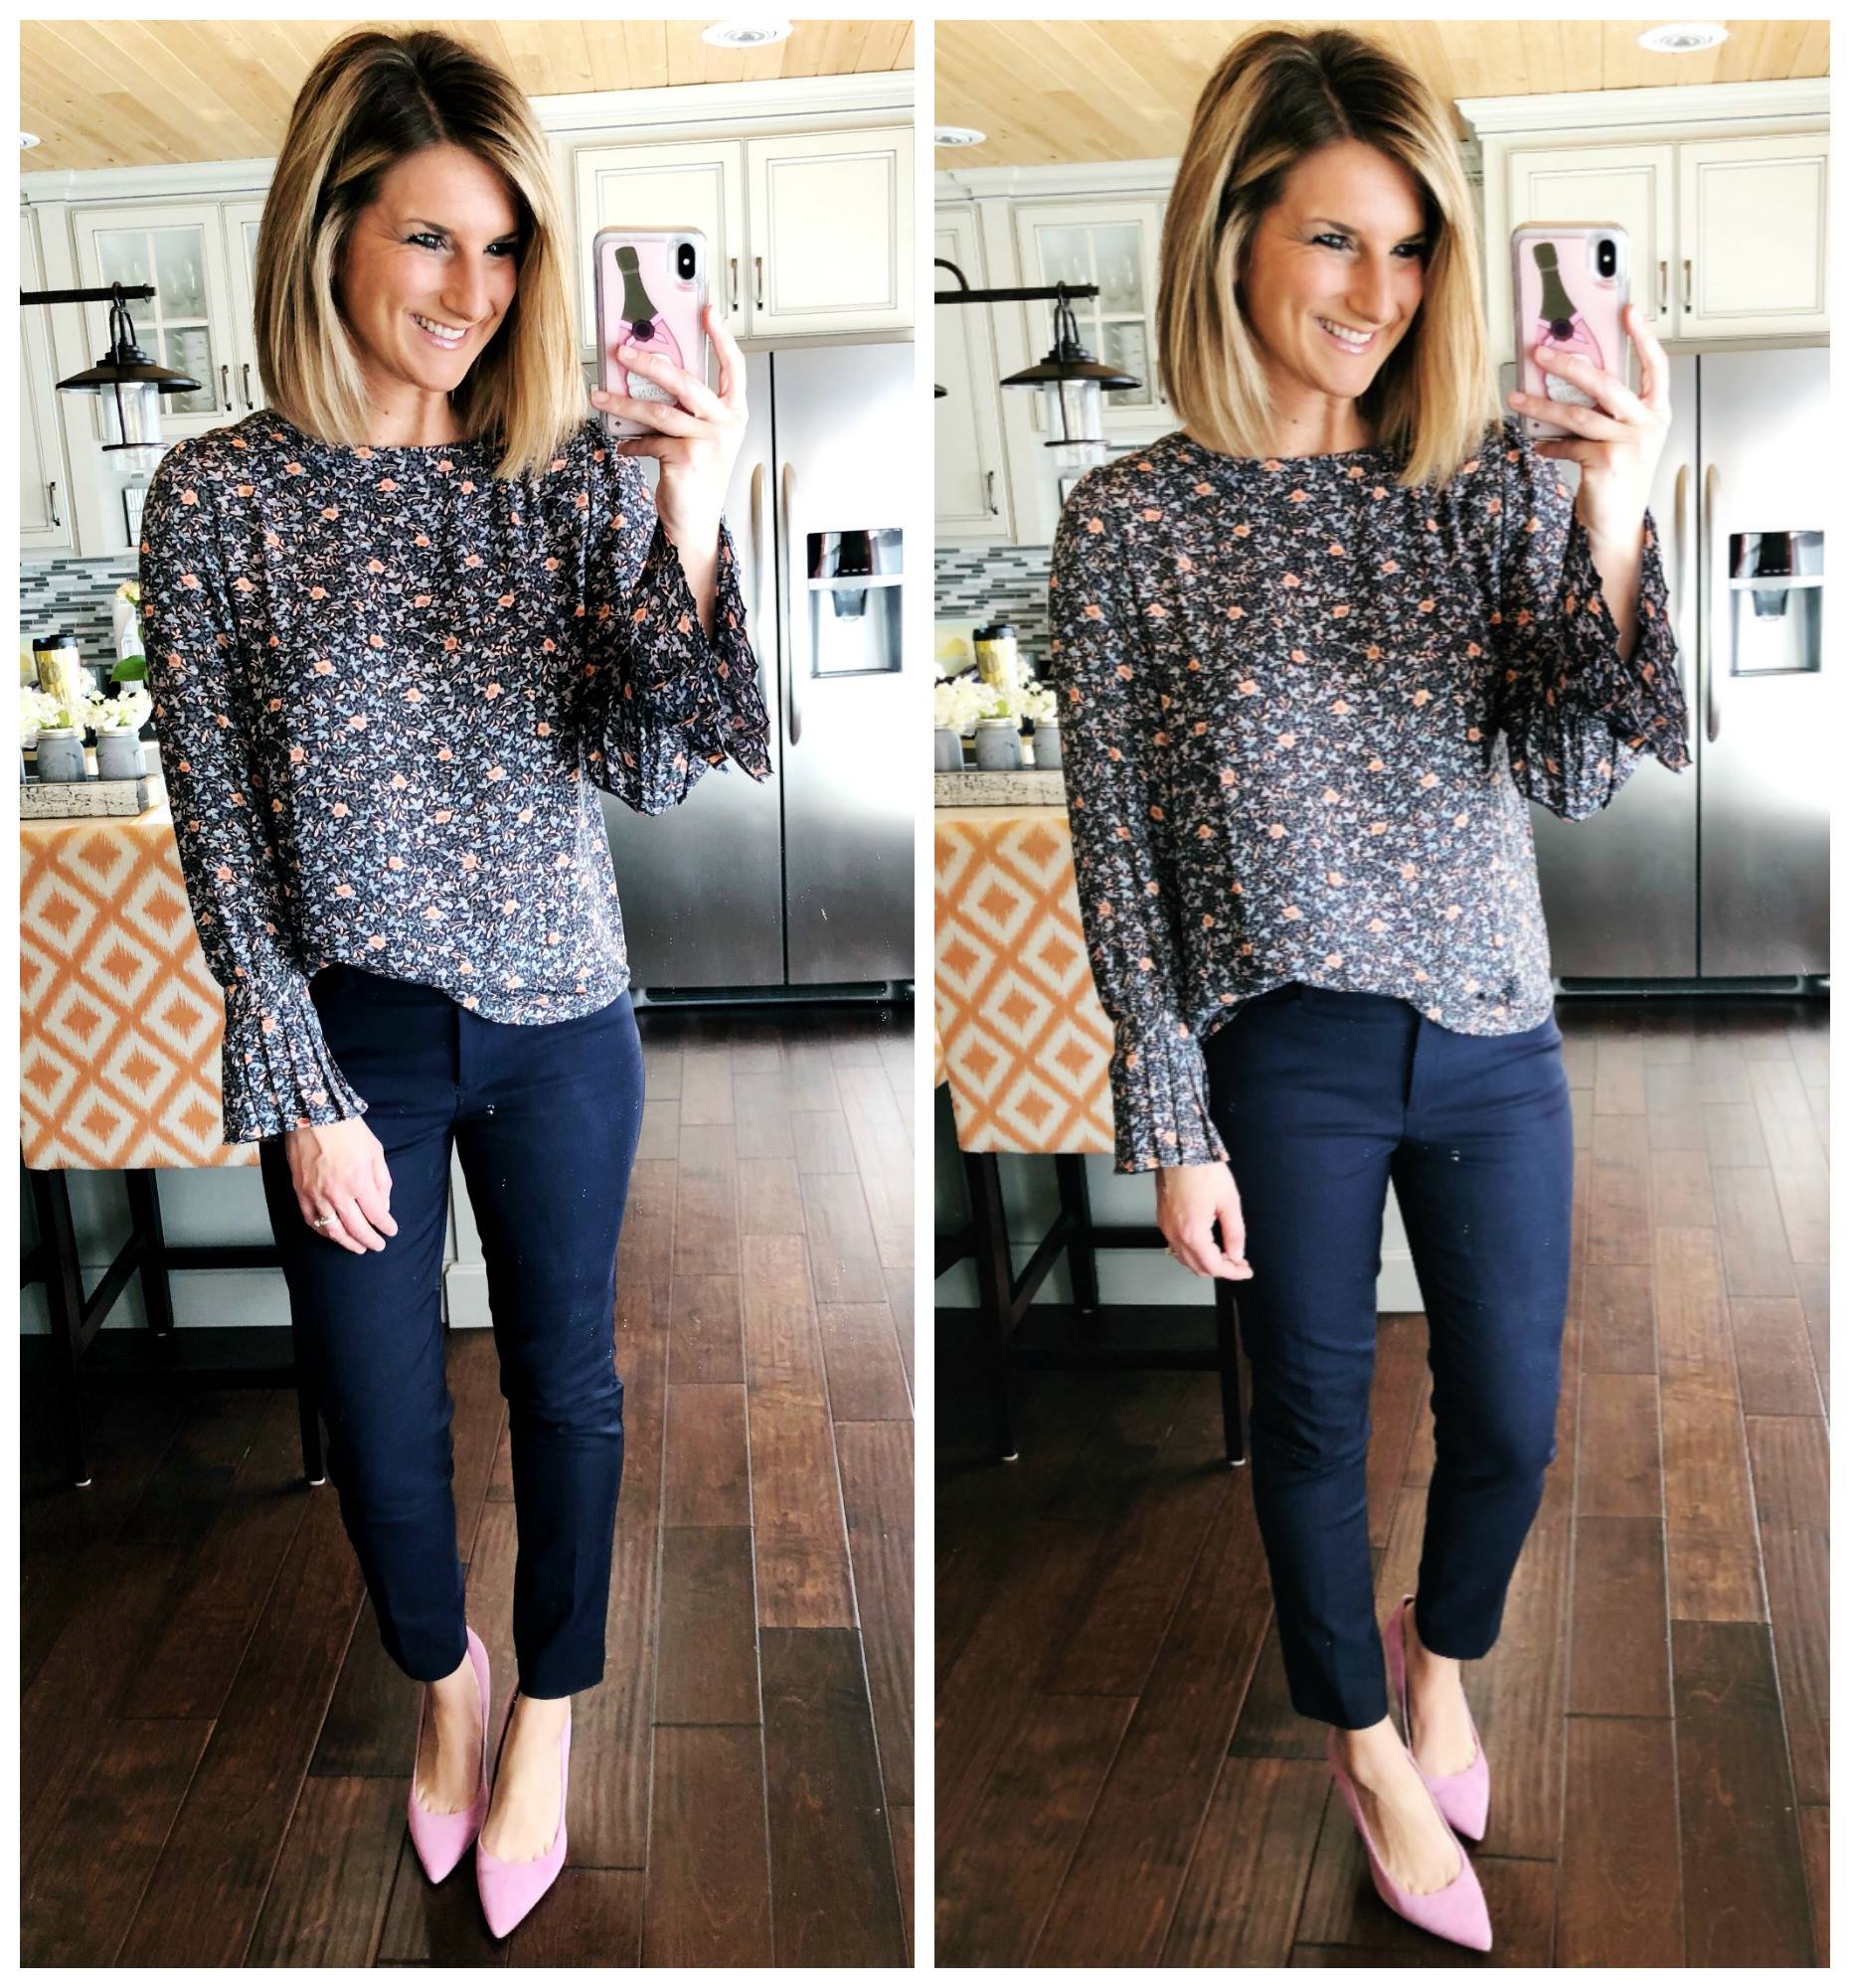 Casual Work Outfit // Work Wear // Floral Blouse + Navy Dress Pants + Heels // Spring Fashion